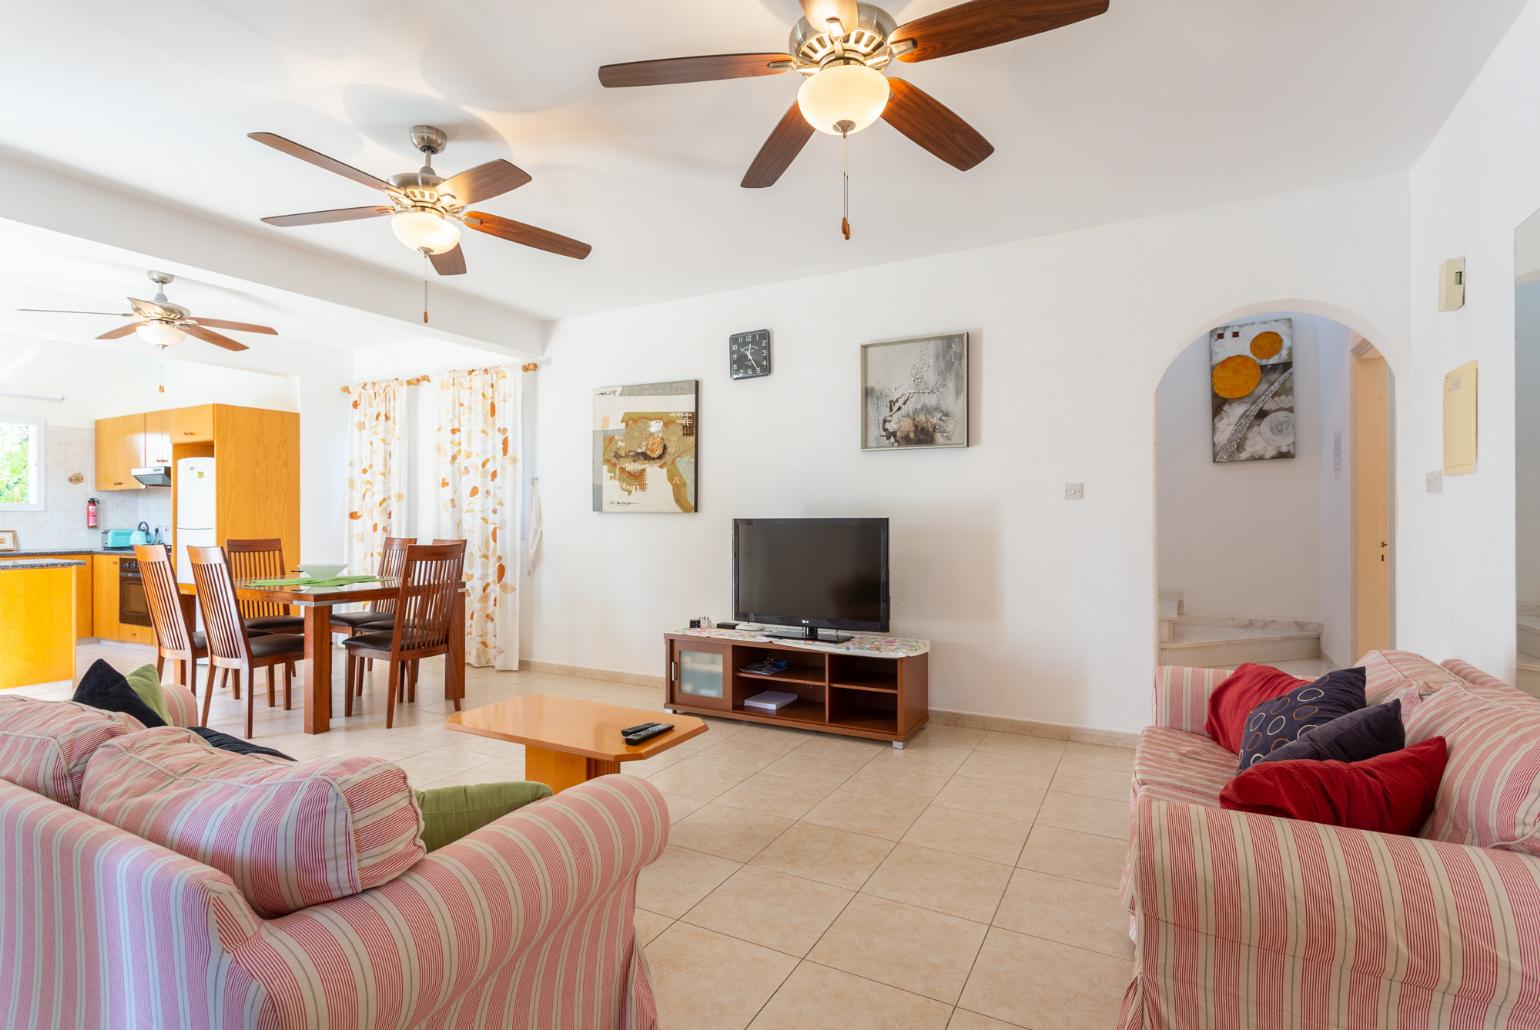 Open-plan living room with sofas, dining area, kitchen, WiFi internet, satellite TV, DVD player, and pool terrace access